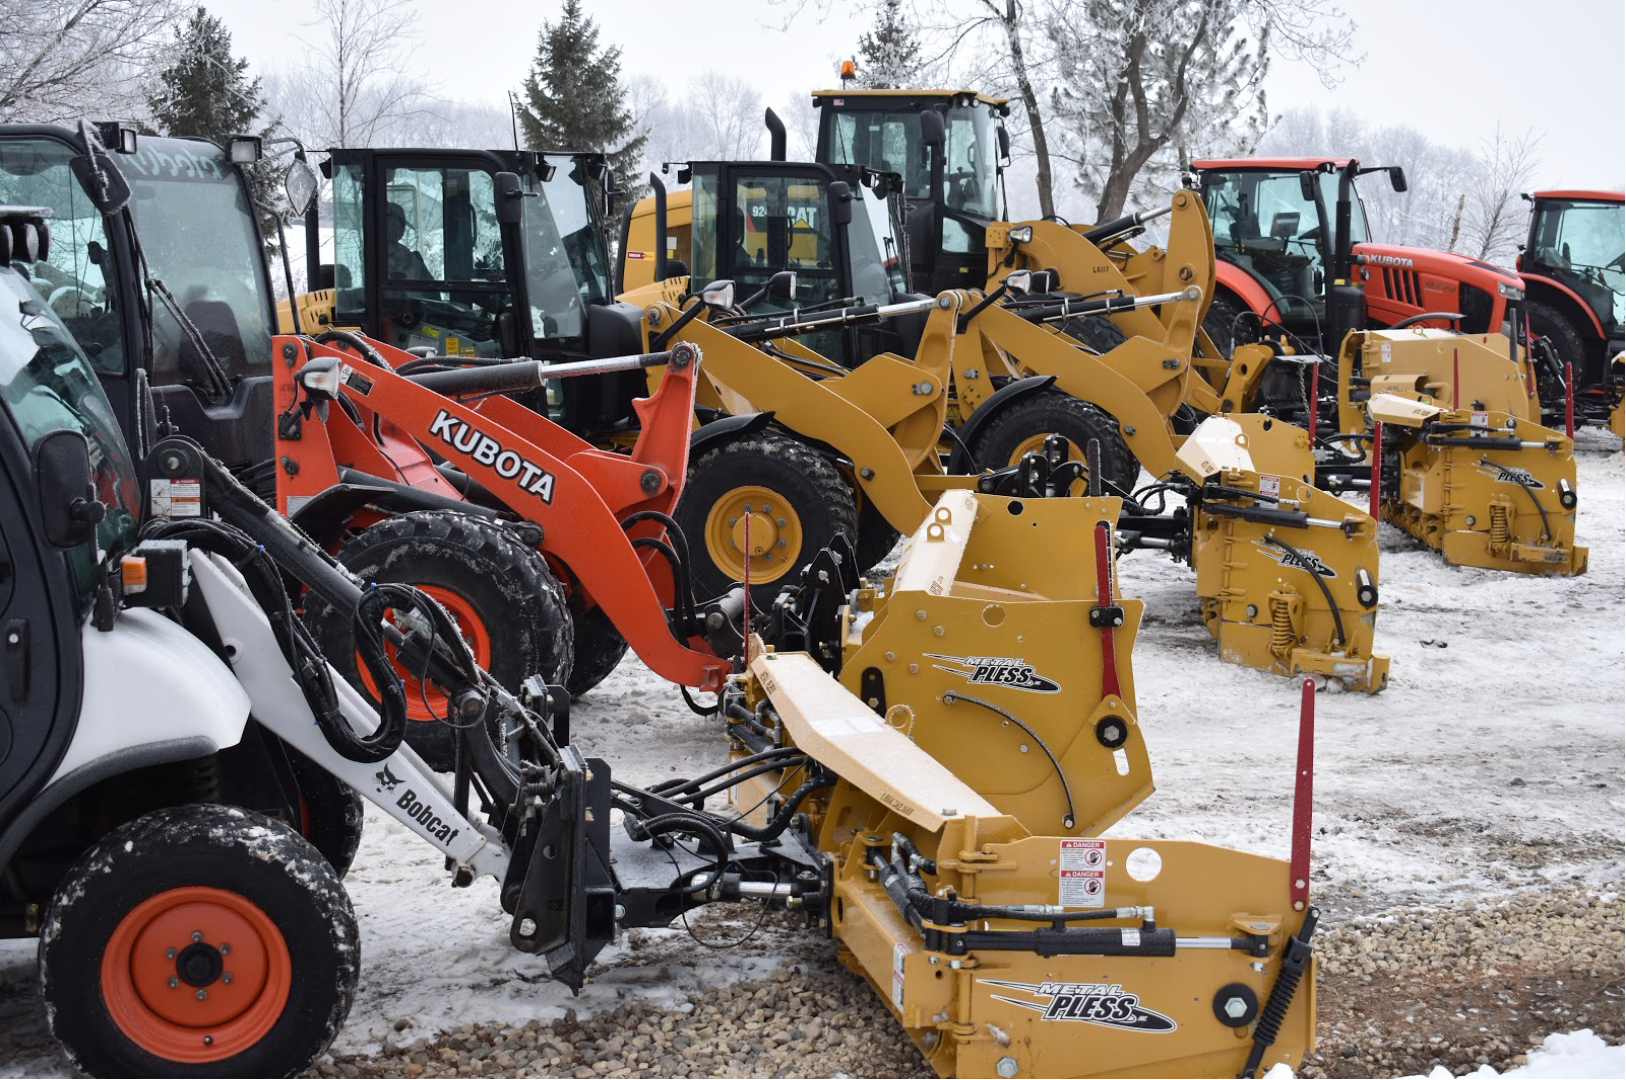 Several Metal Pless snow plows on the front of snow removal machines